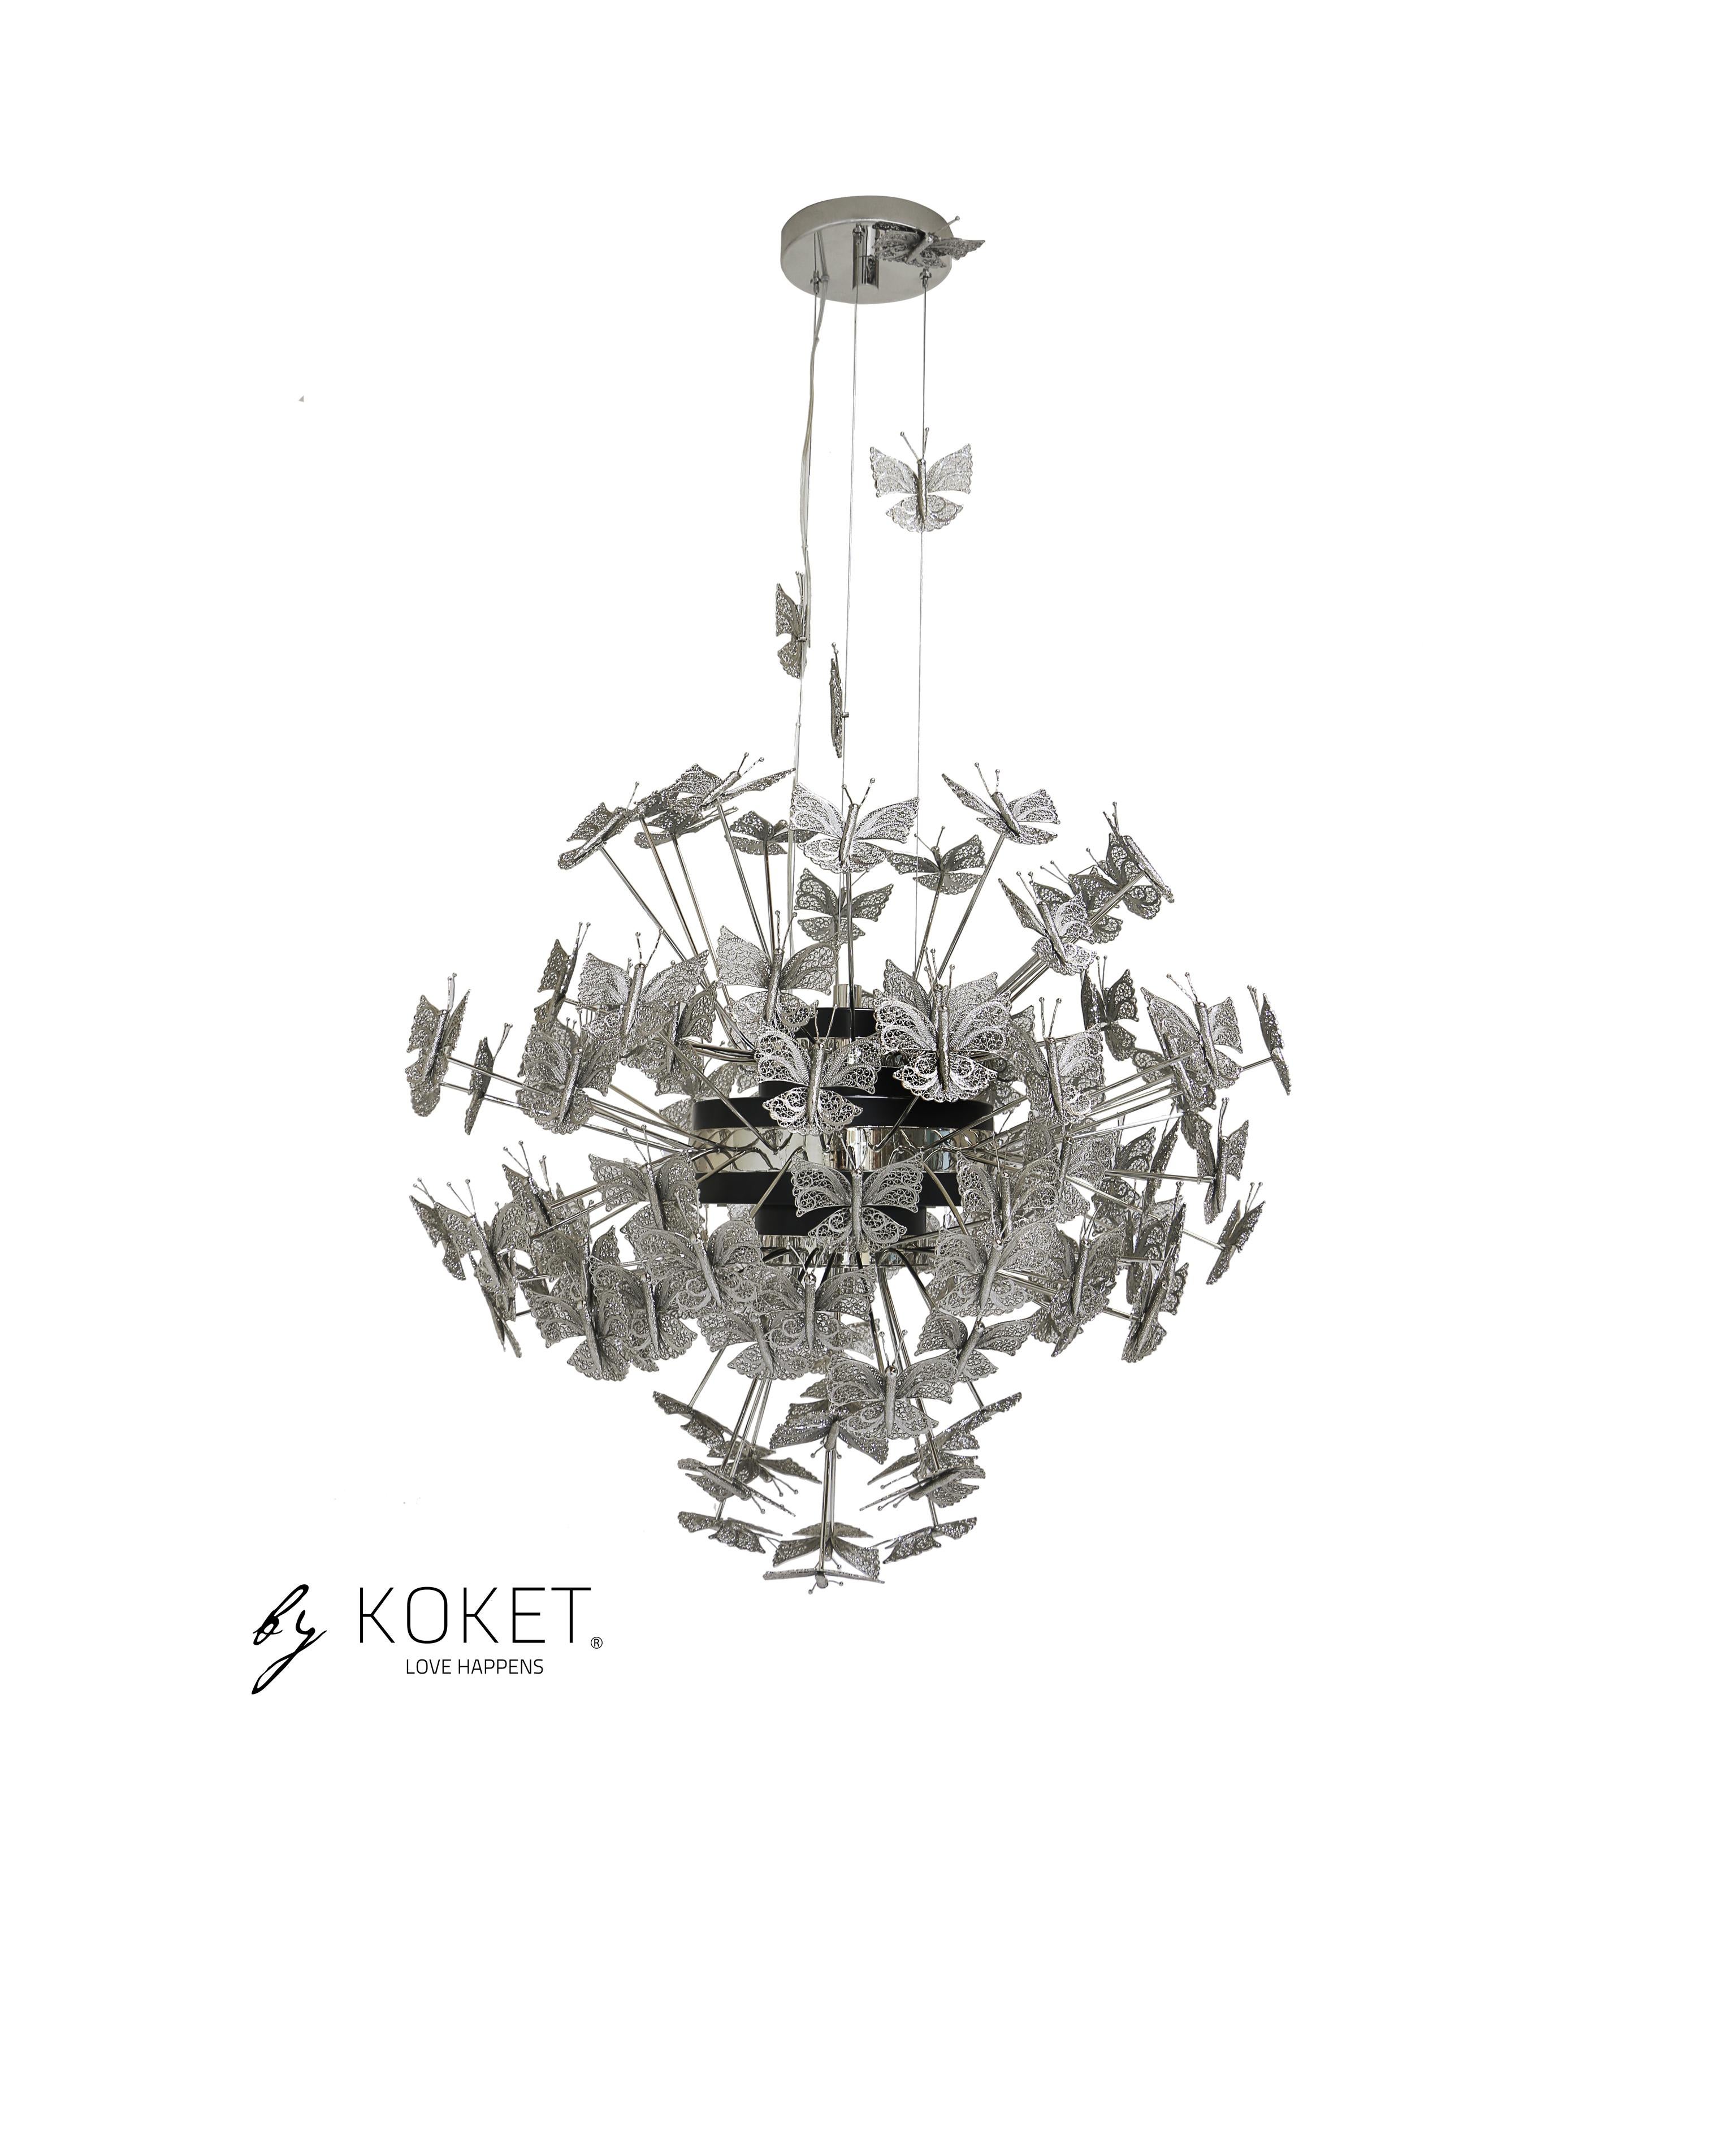 The innocent drama of a whimsical butterfly through the enchanted journey of life. The Nymph chandelier embraces the wild side of this rare and beautiful animal that so gracefully bejewels the lighting fixture. Delicate metal butterflies hover in